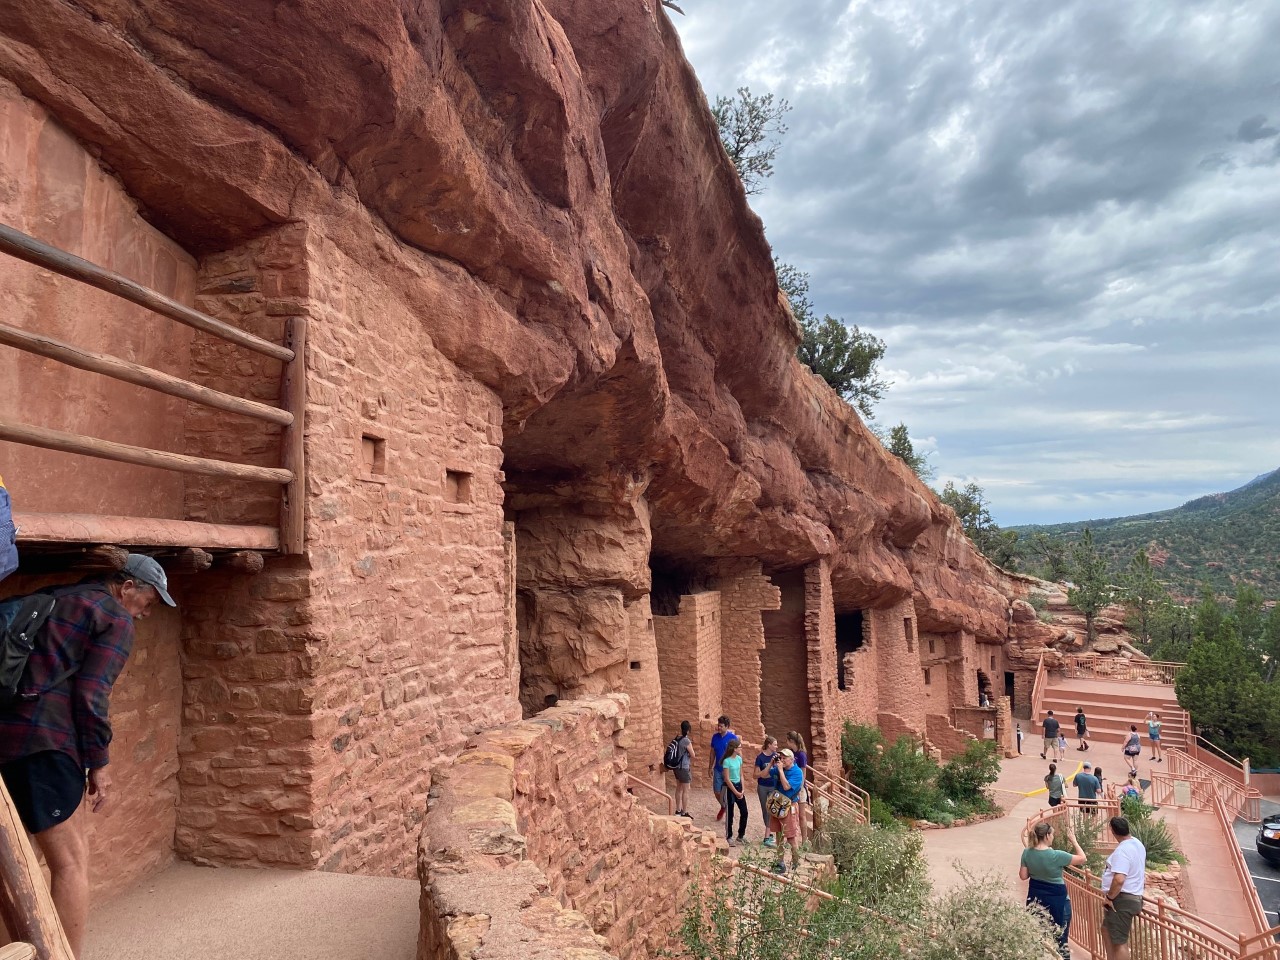 A view of the Manitou Cliff Dwellings